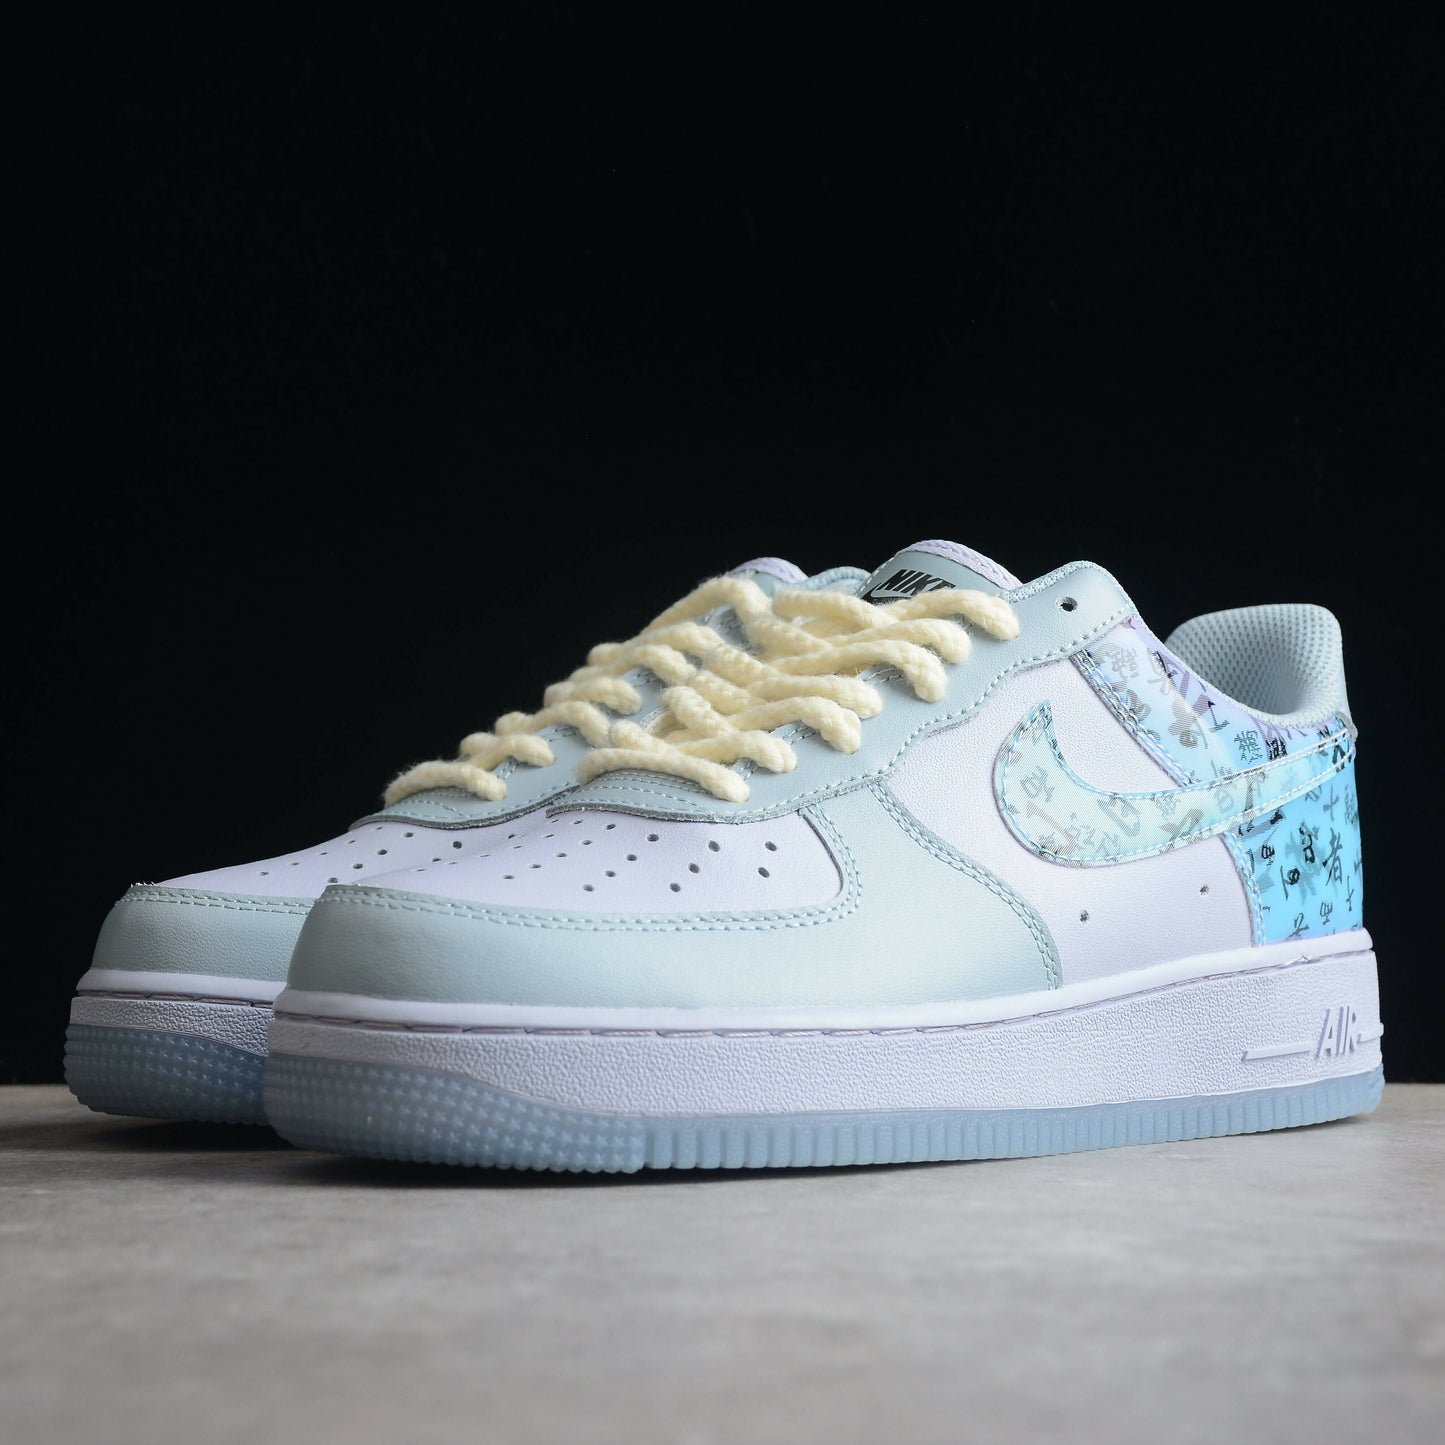 Air Force 1 with "Japan Hieroglyphs"